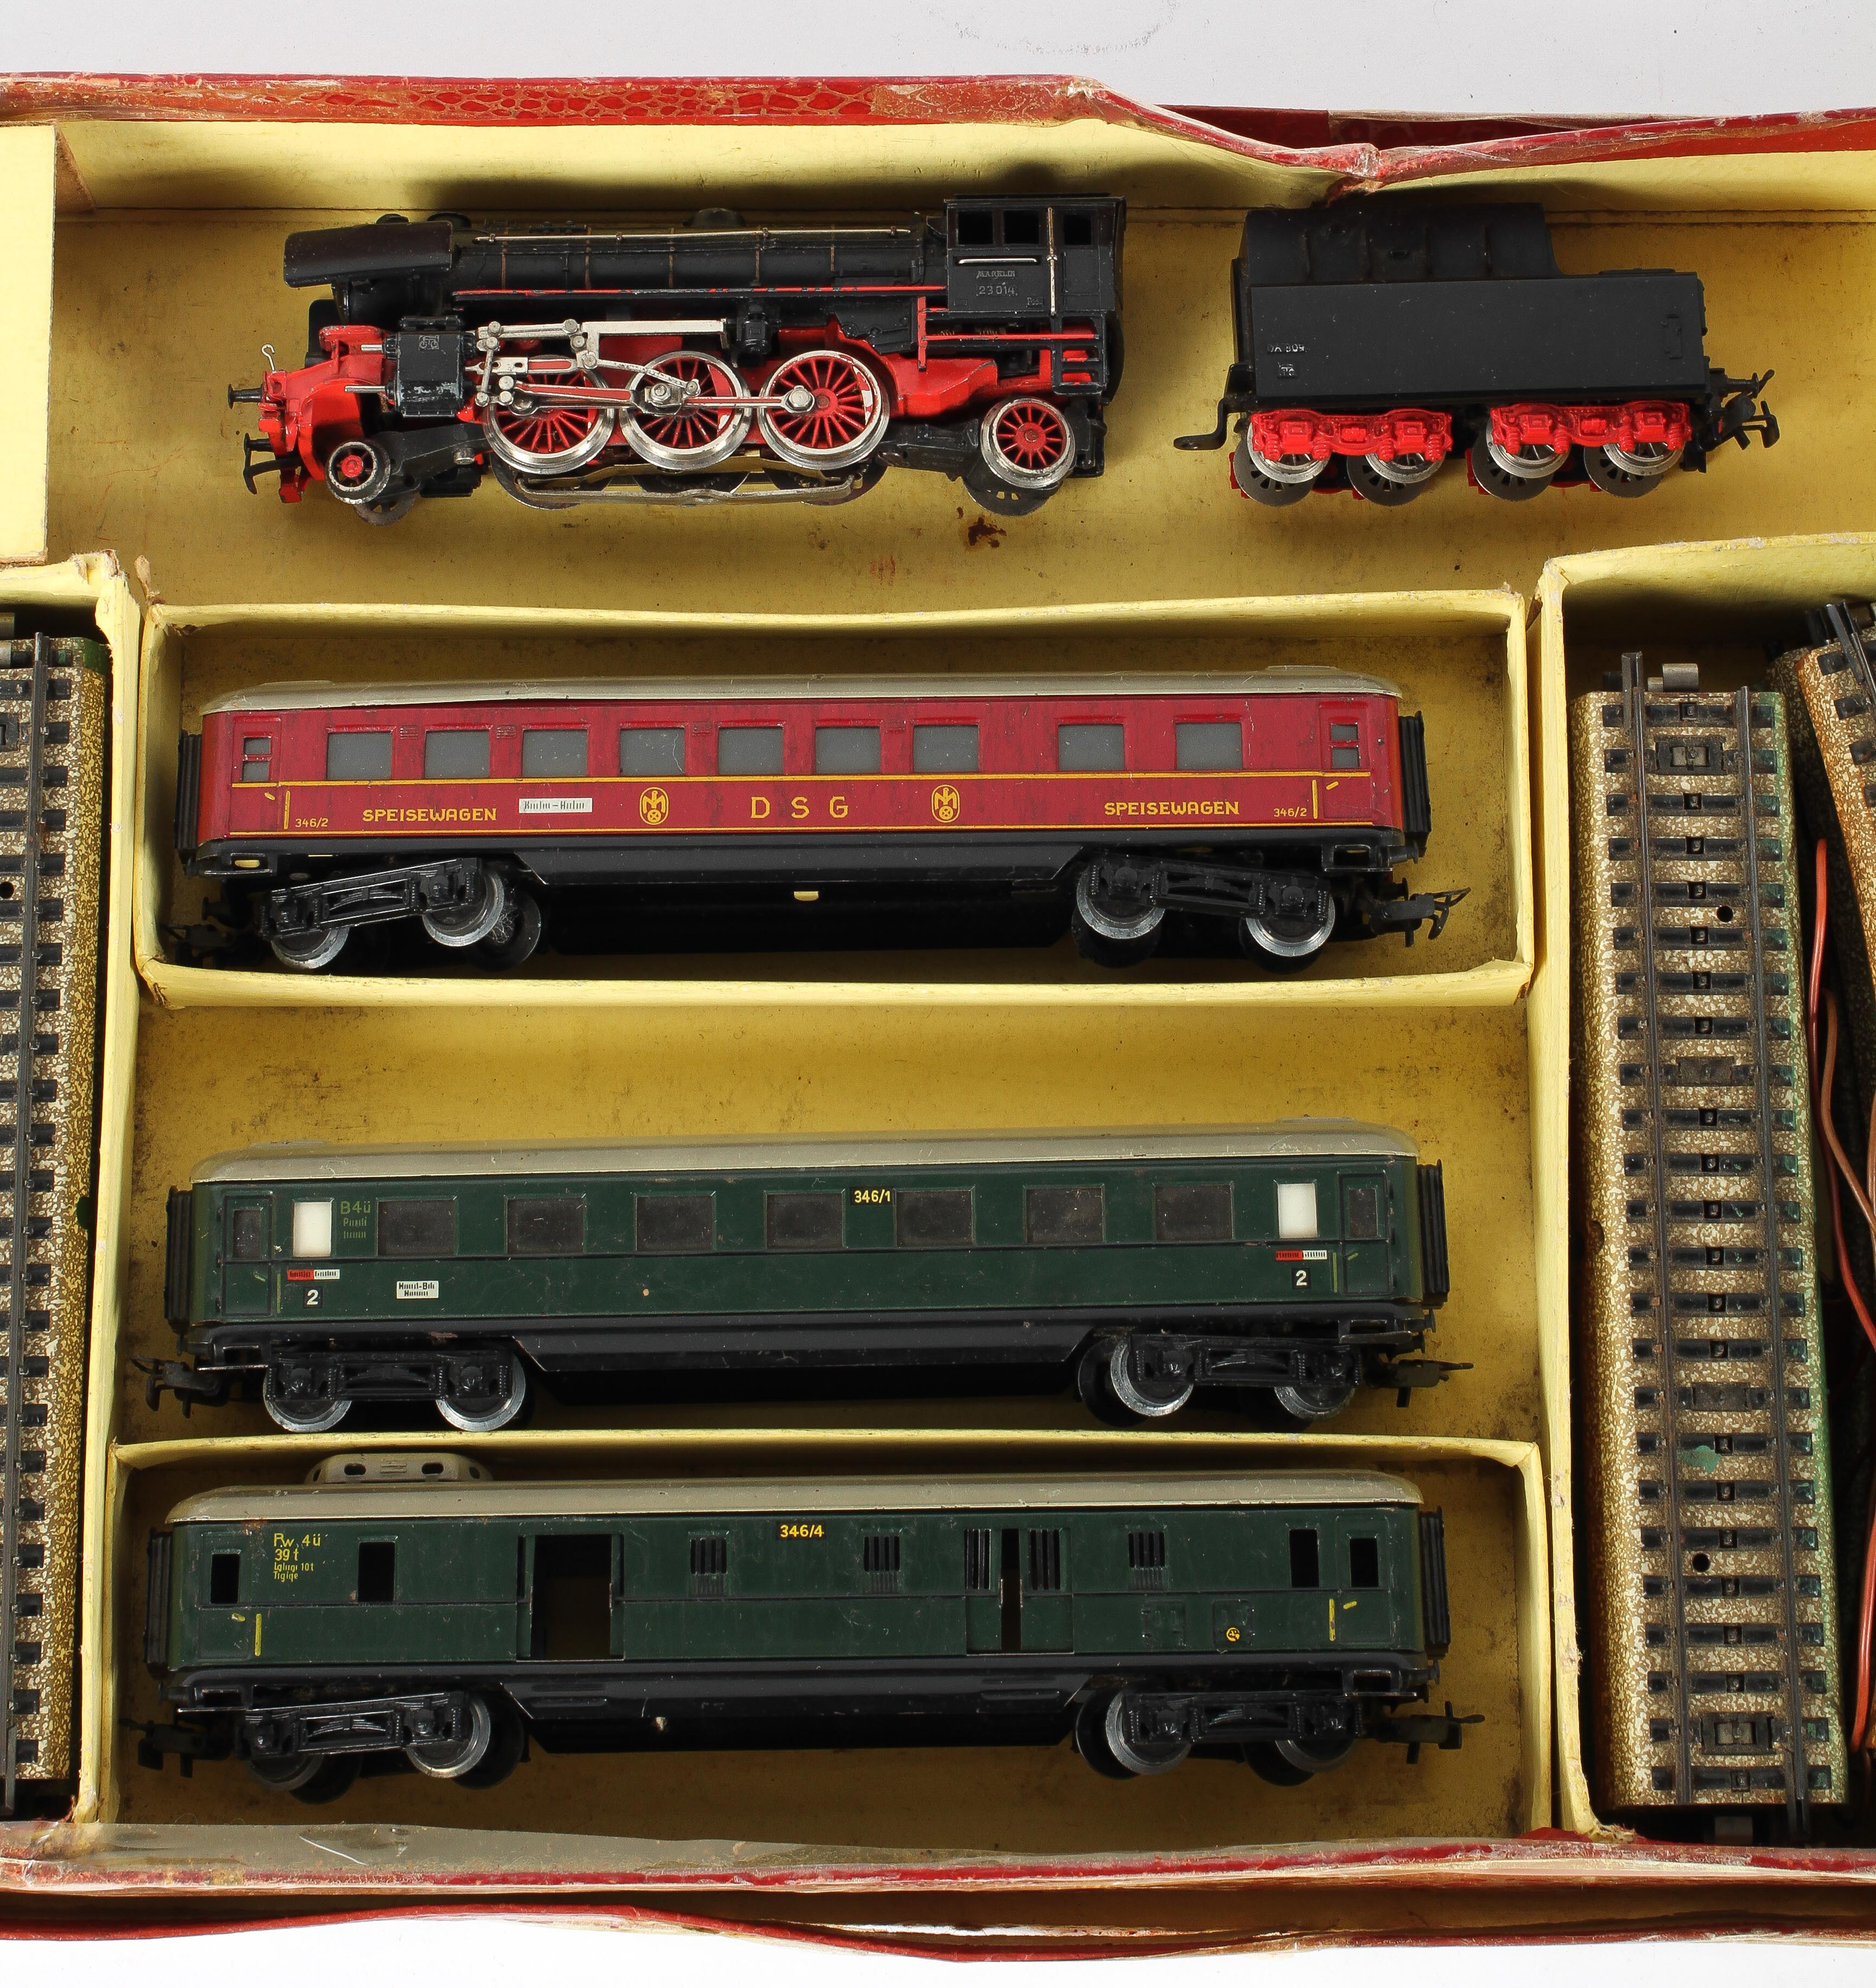 A Marklin boxed train set, H0 gauge, with locomotive 23014, Speisewagen, another coach , - Image 2 of 2